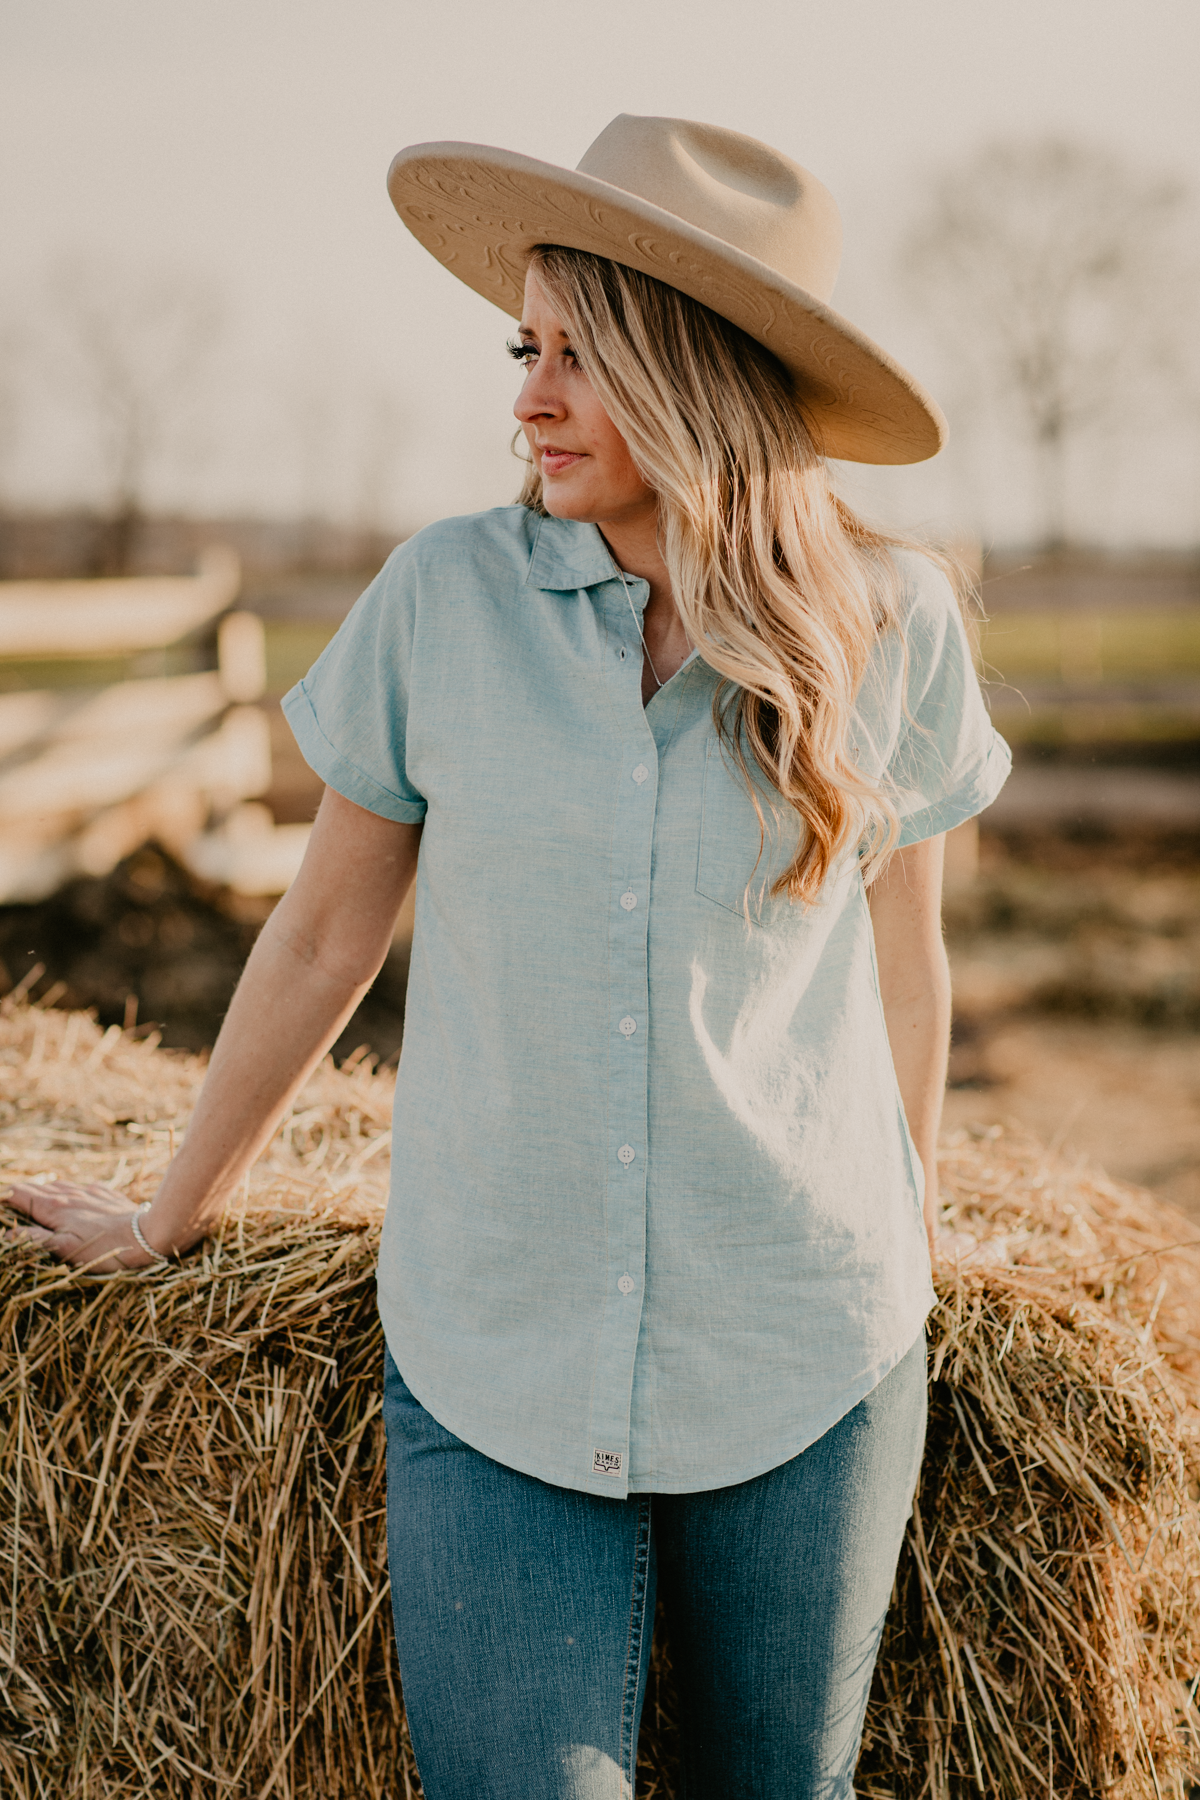 A stylish woman leans on a hay bale, wearing a light blue shirt and jeans, paired with a tan cowboy hat, exuding a chic farm-inspired look.